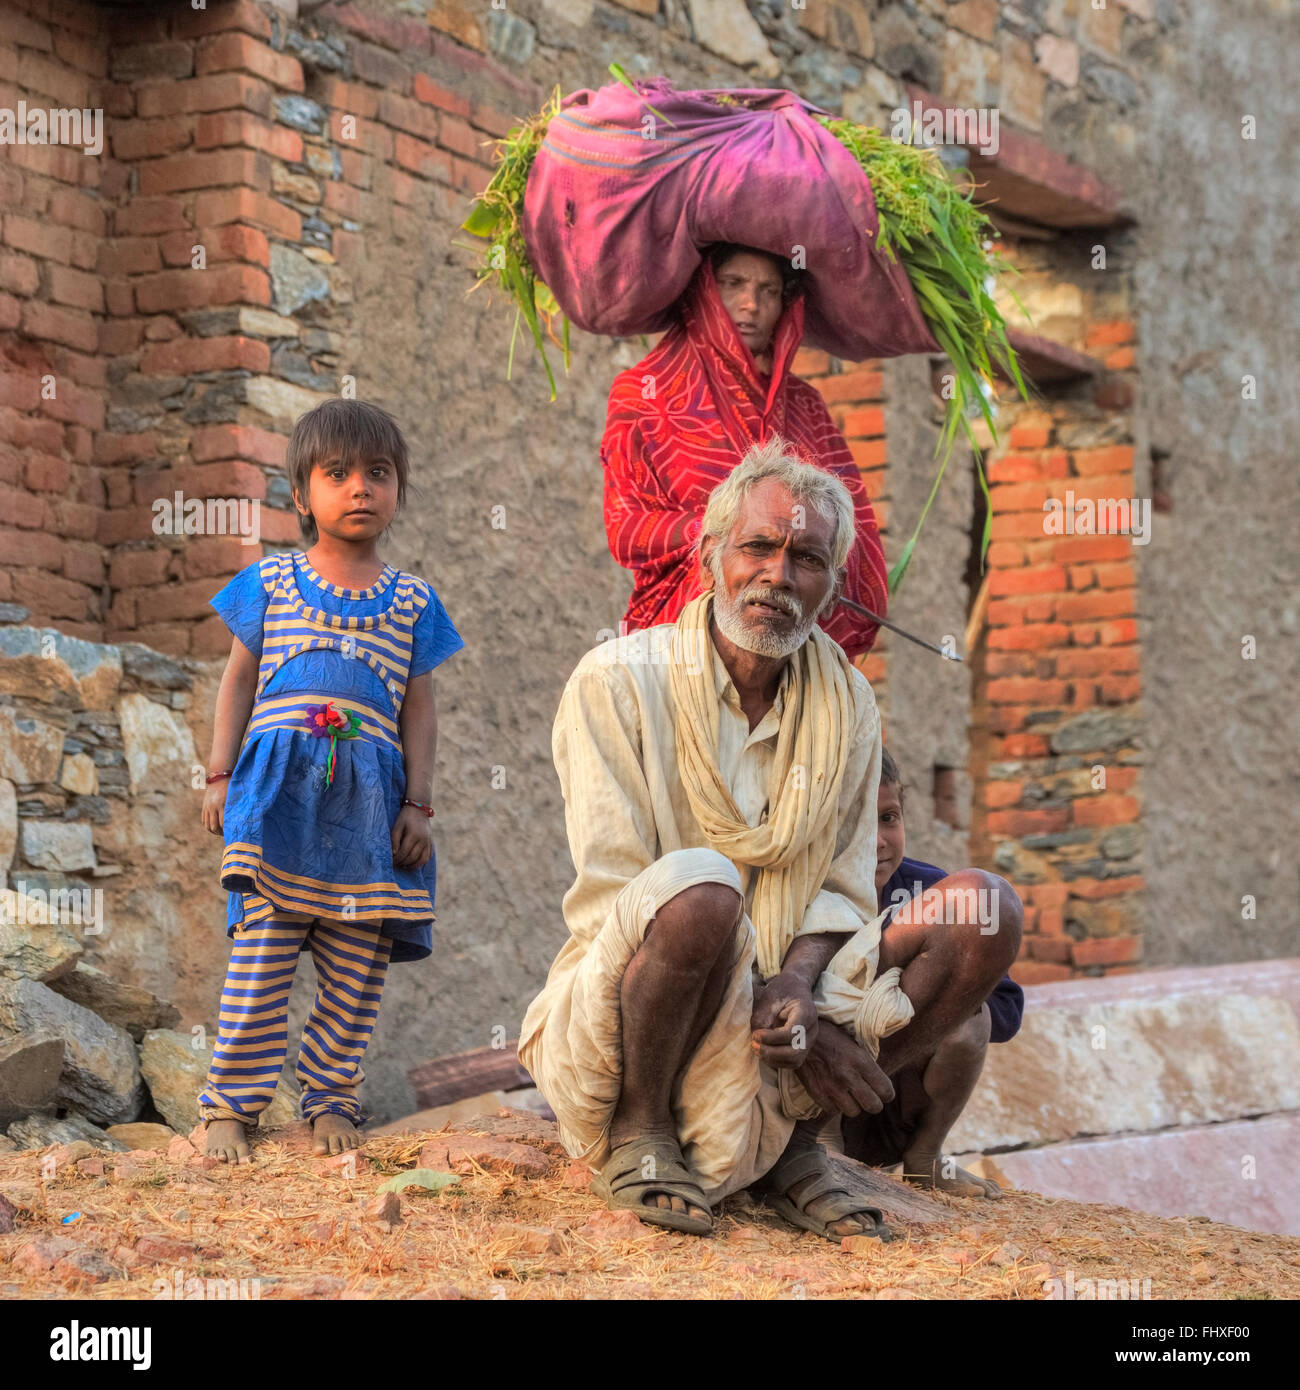 Indian family in rural Rajasthan, India Stock Photo